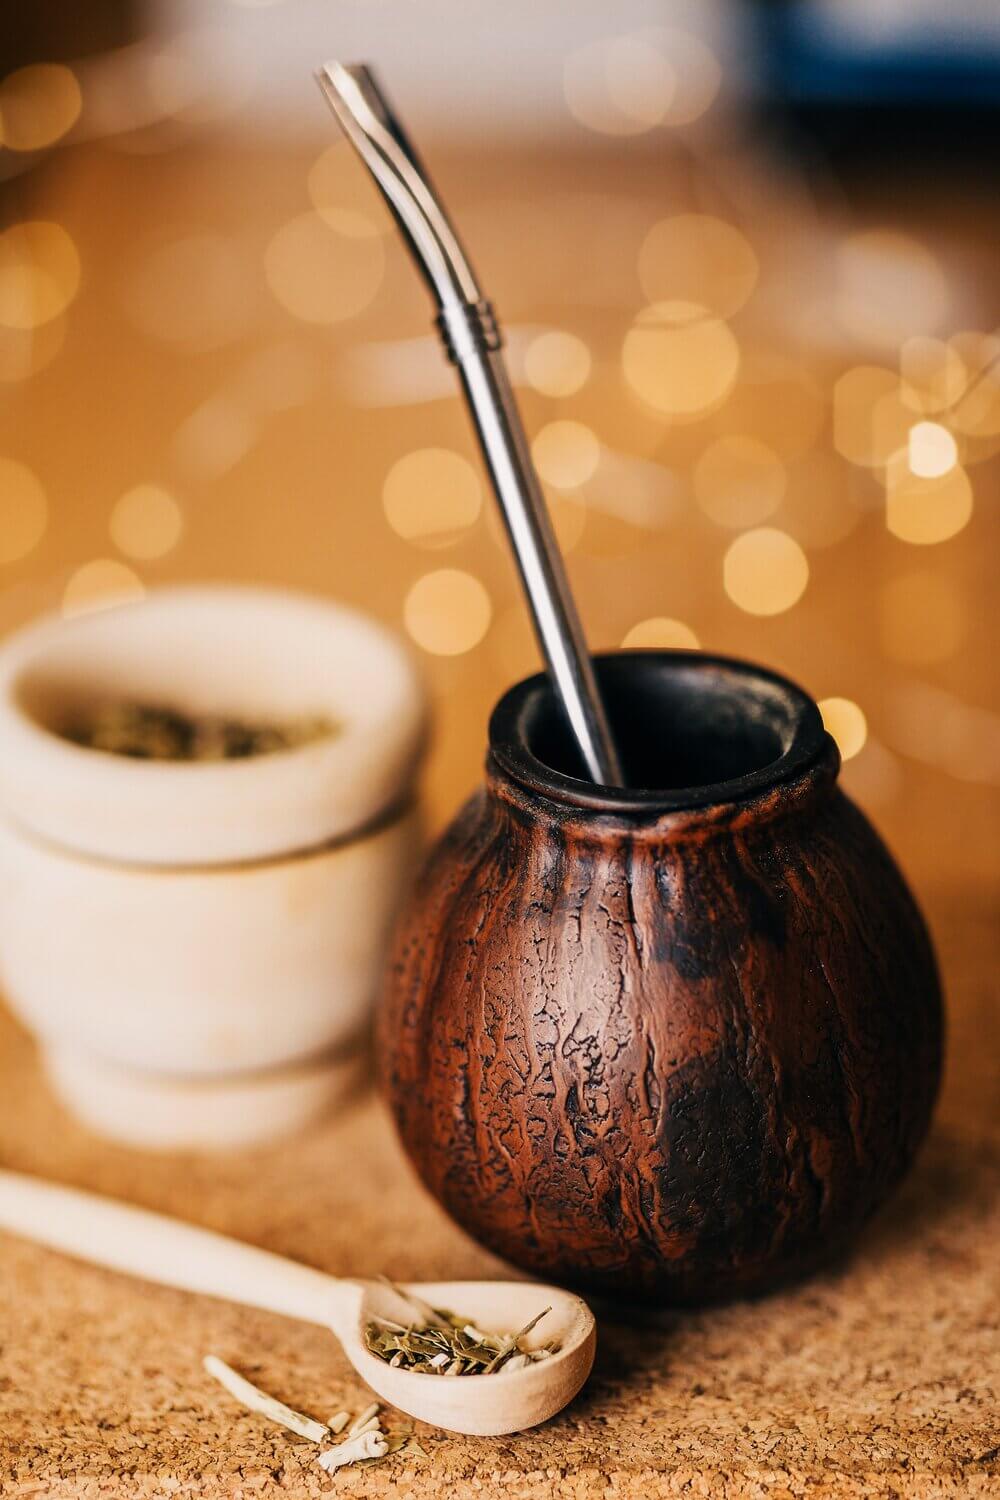 Mate Drink: The #1 South American Tradition with a Great Flavor